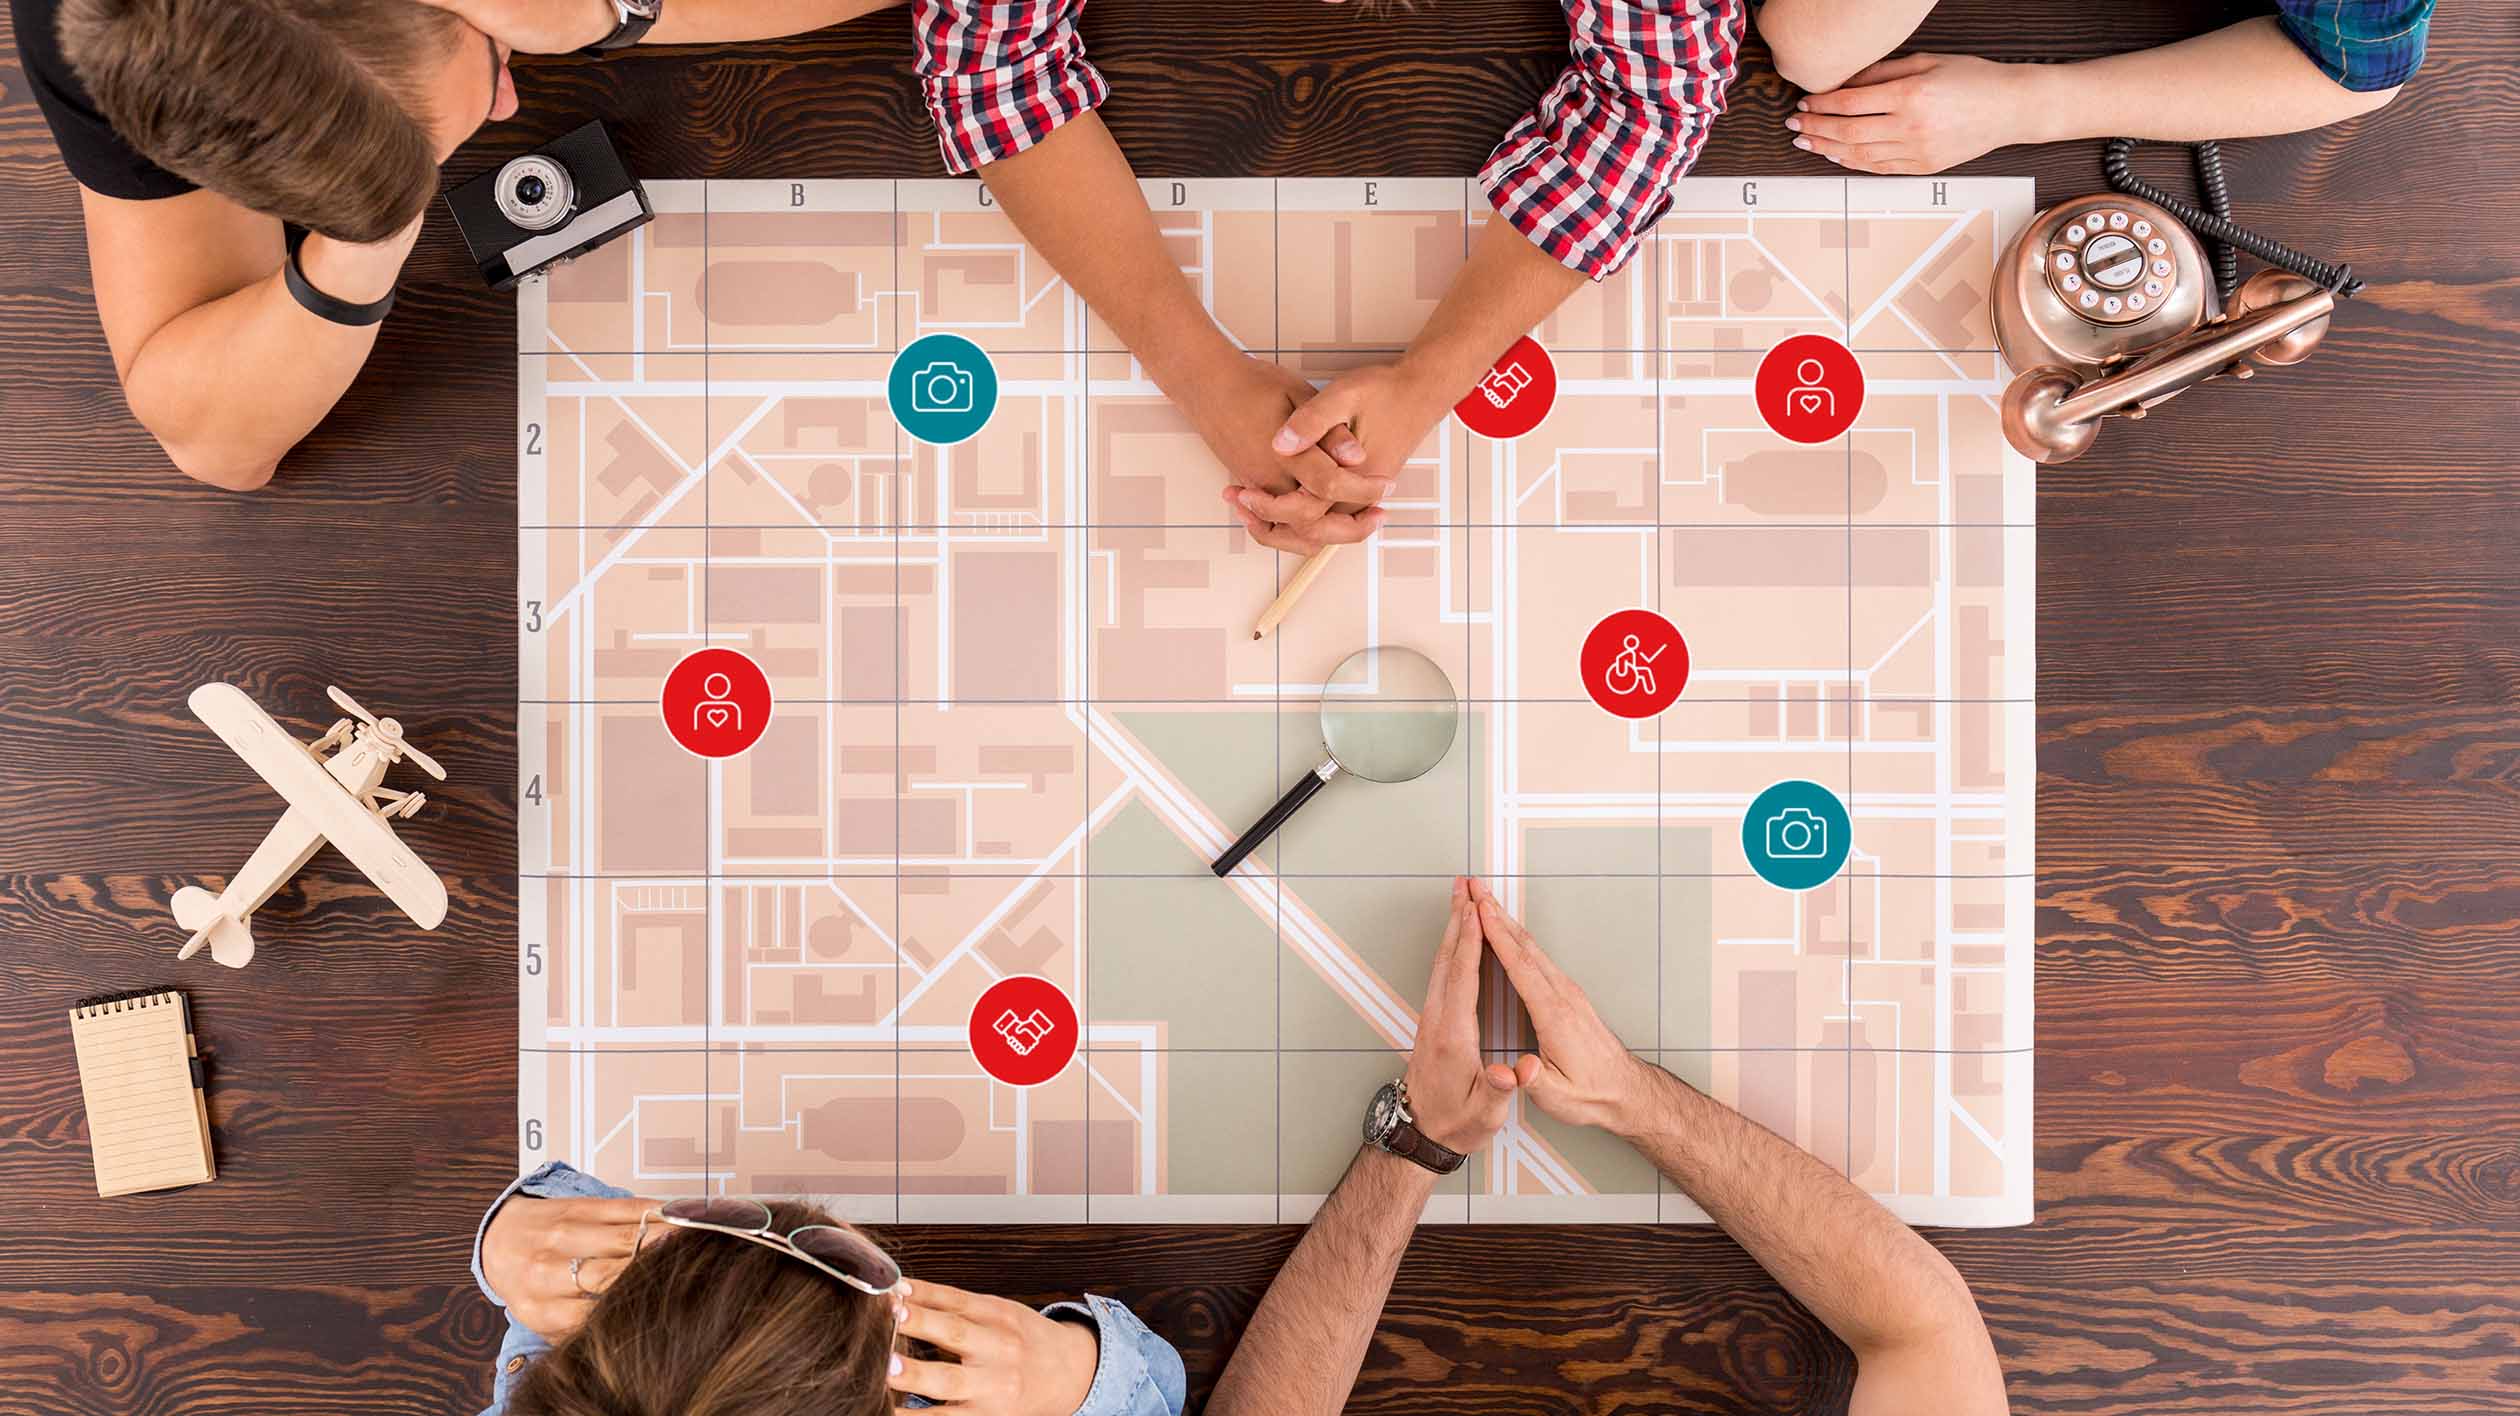 View from above of a table at which several people are sitting: On the table is a large, abstract road map